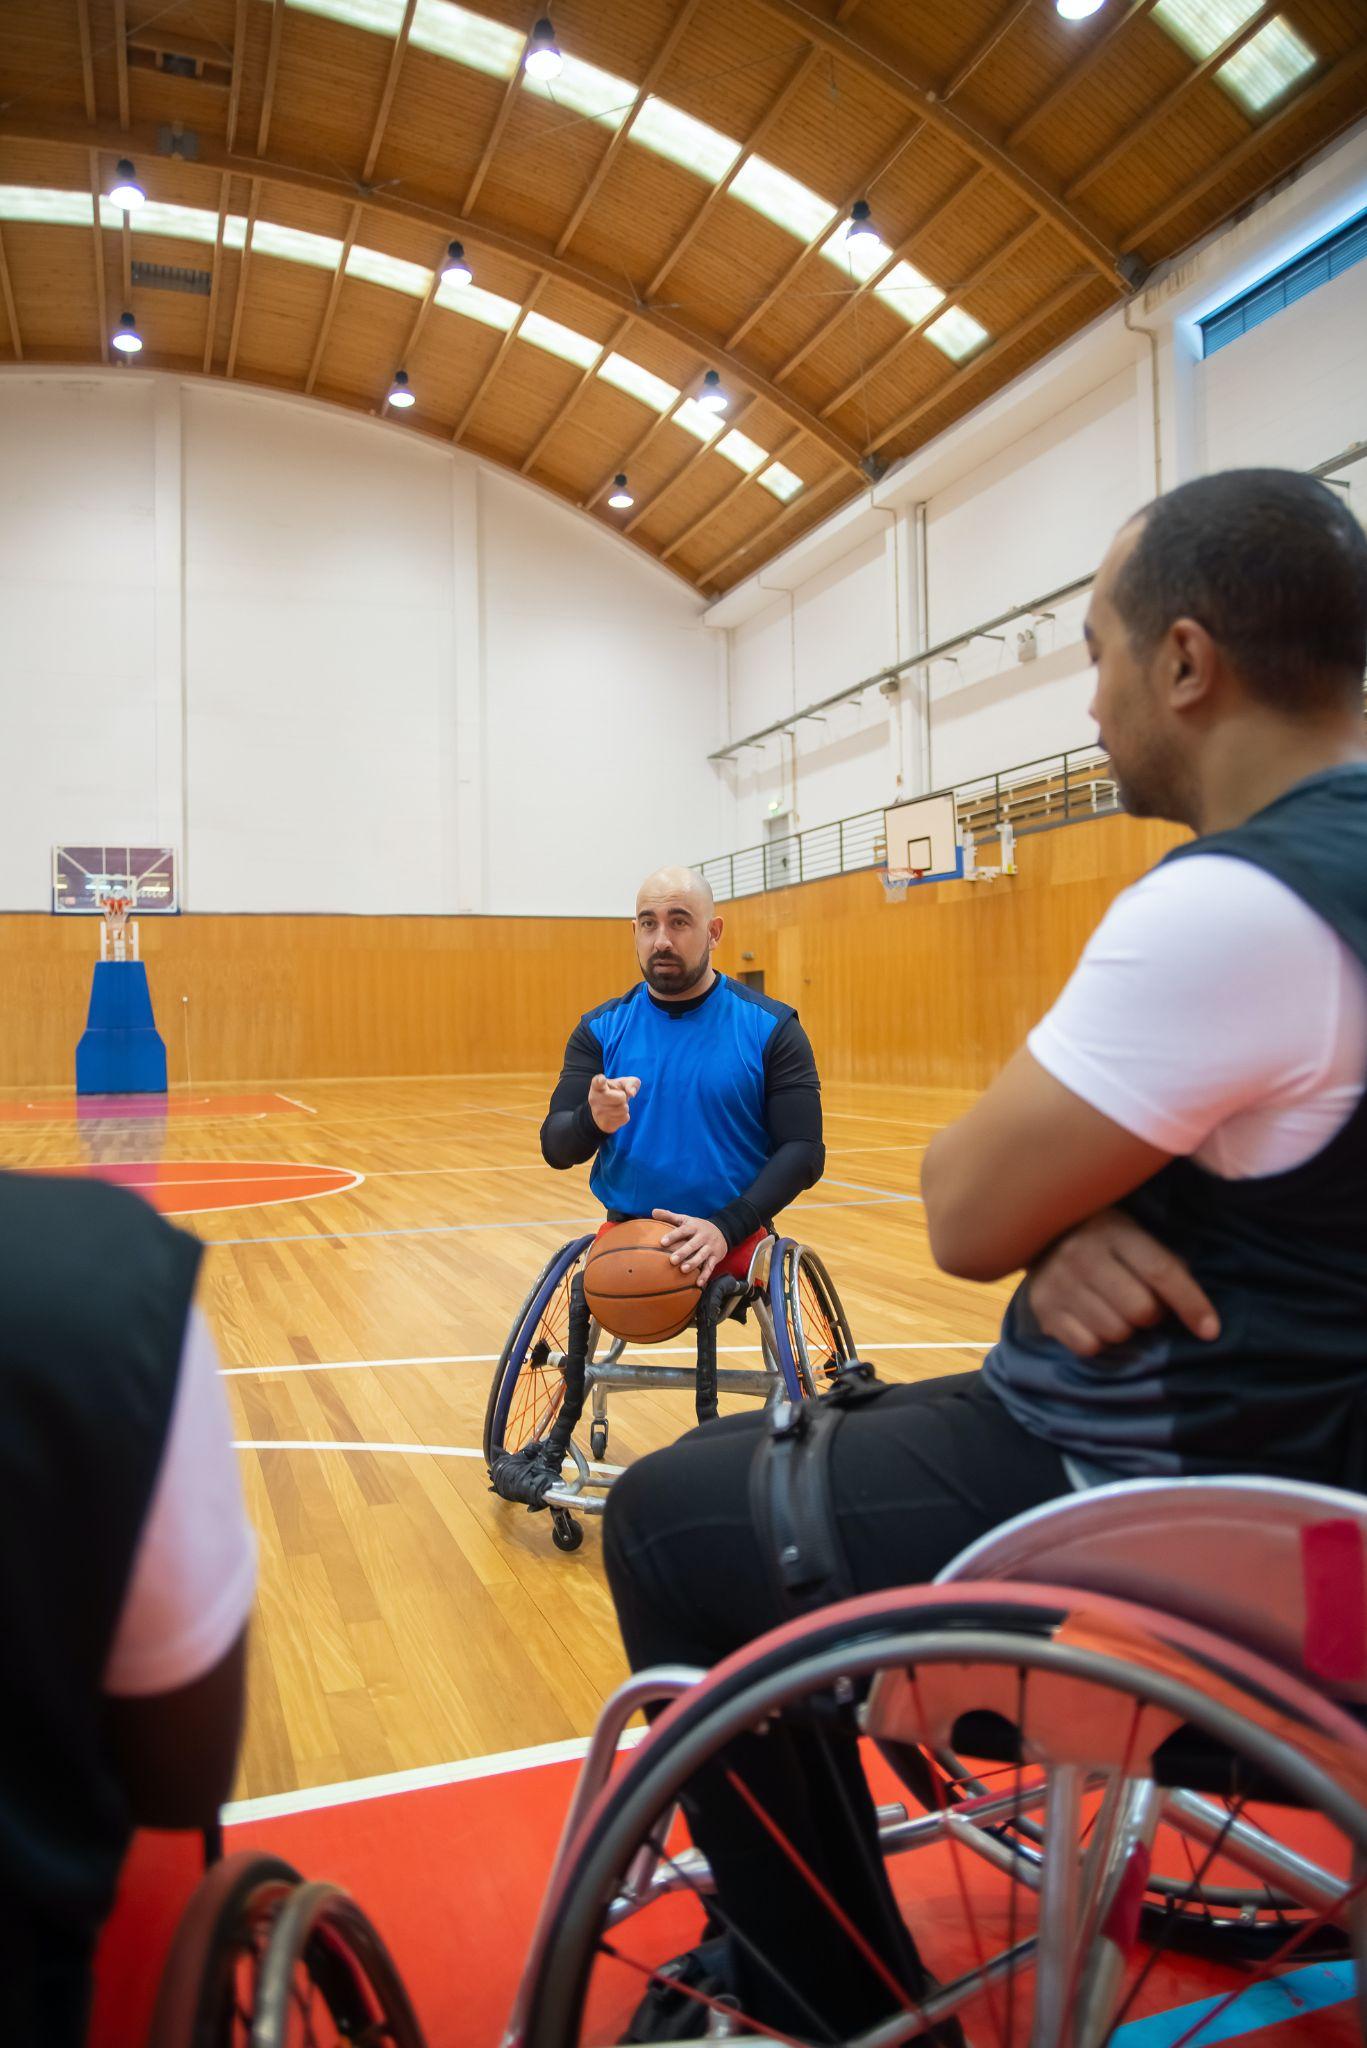 Men in wheelchair on a basketball court getting ready to play basketball